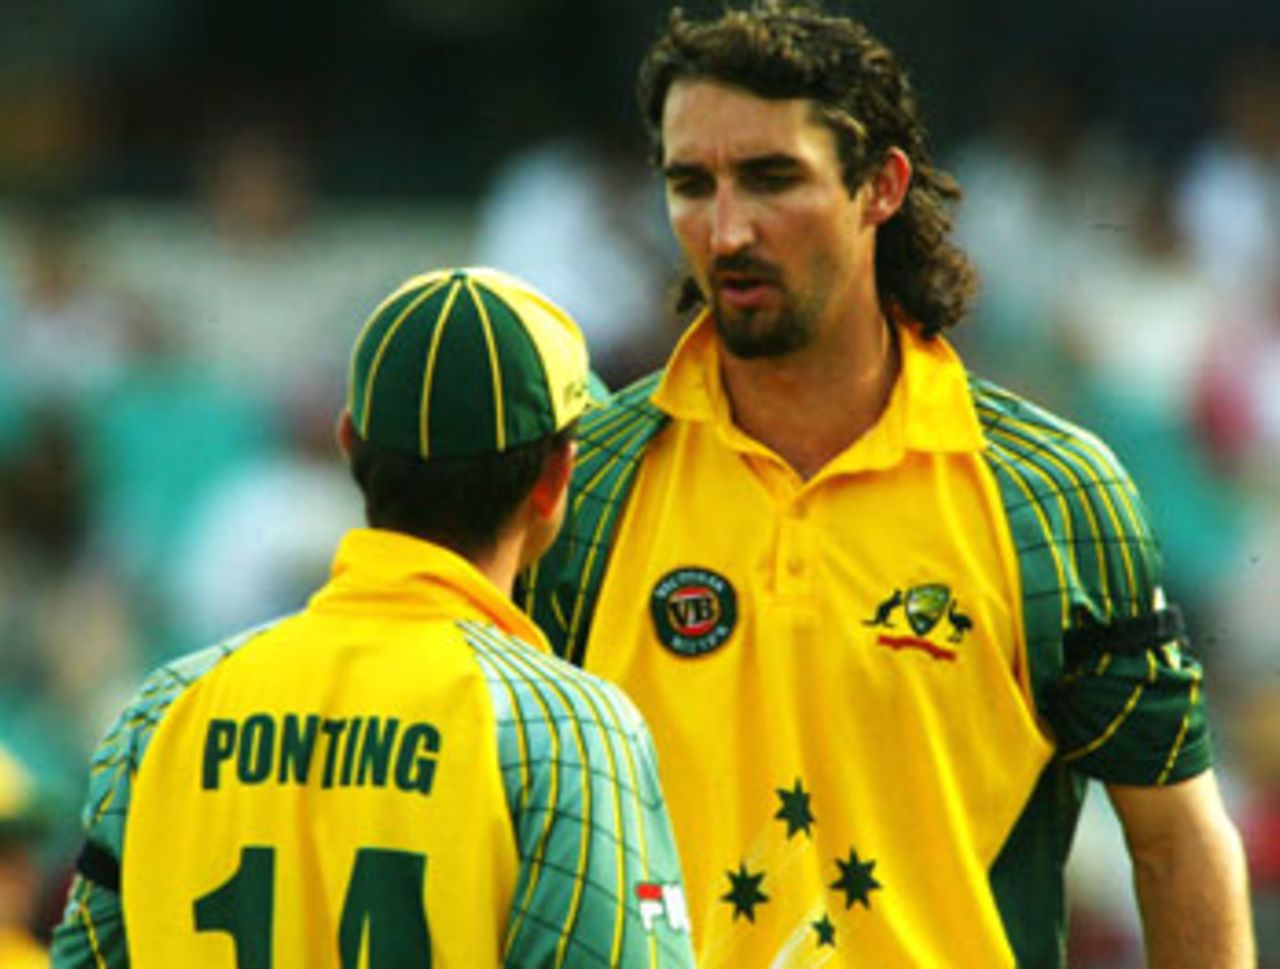 The Indian run spree needs stopping. Ricky Ponting places faith in Jason Gillespie, who responds beautifully, Australia v India, VB Series, 7th ODI, Sydney, January 22, 2004